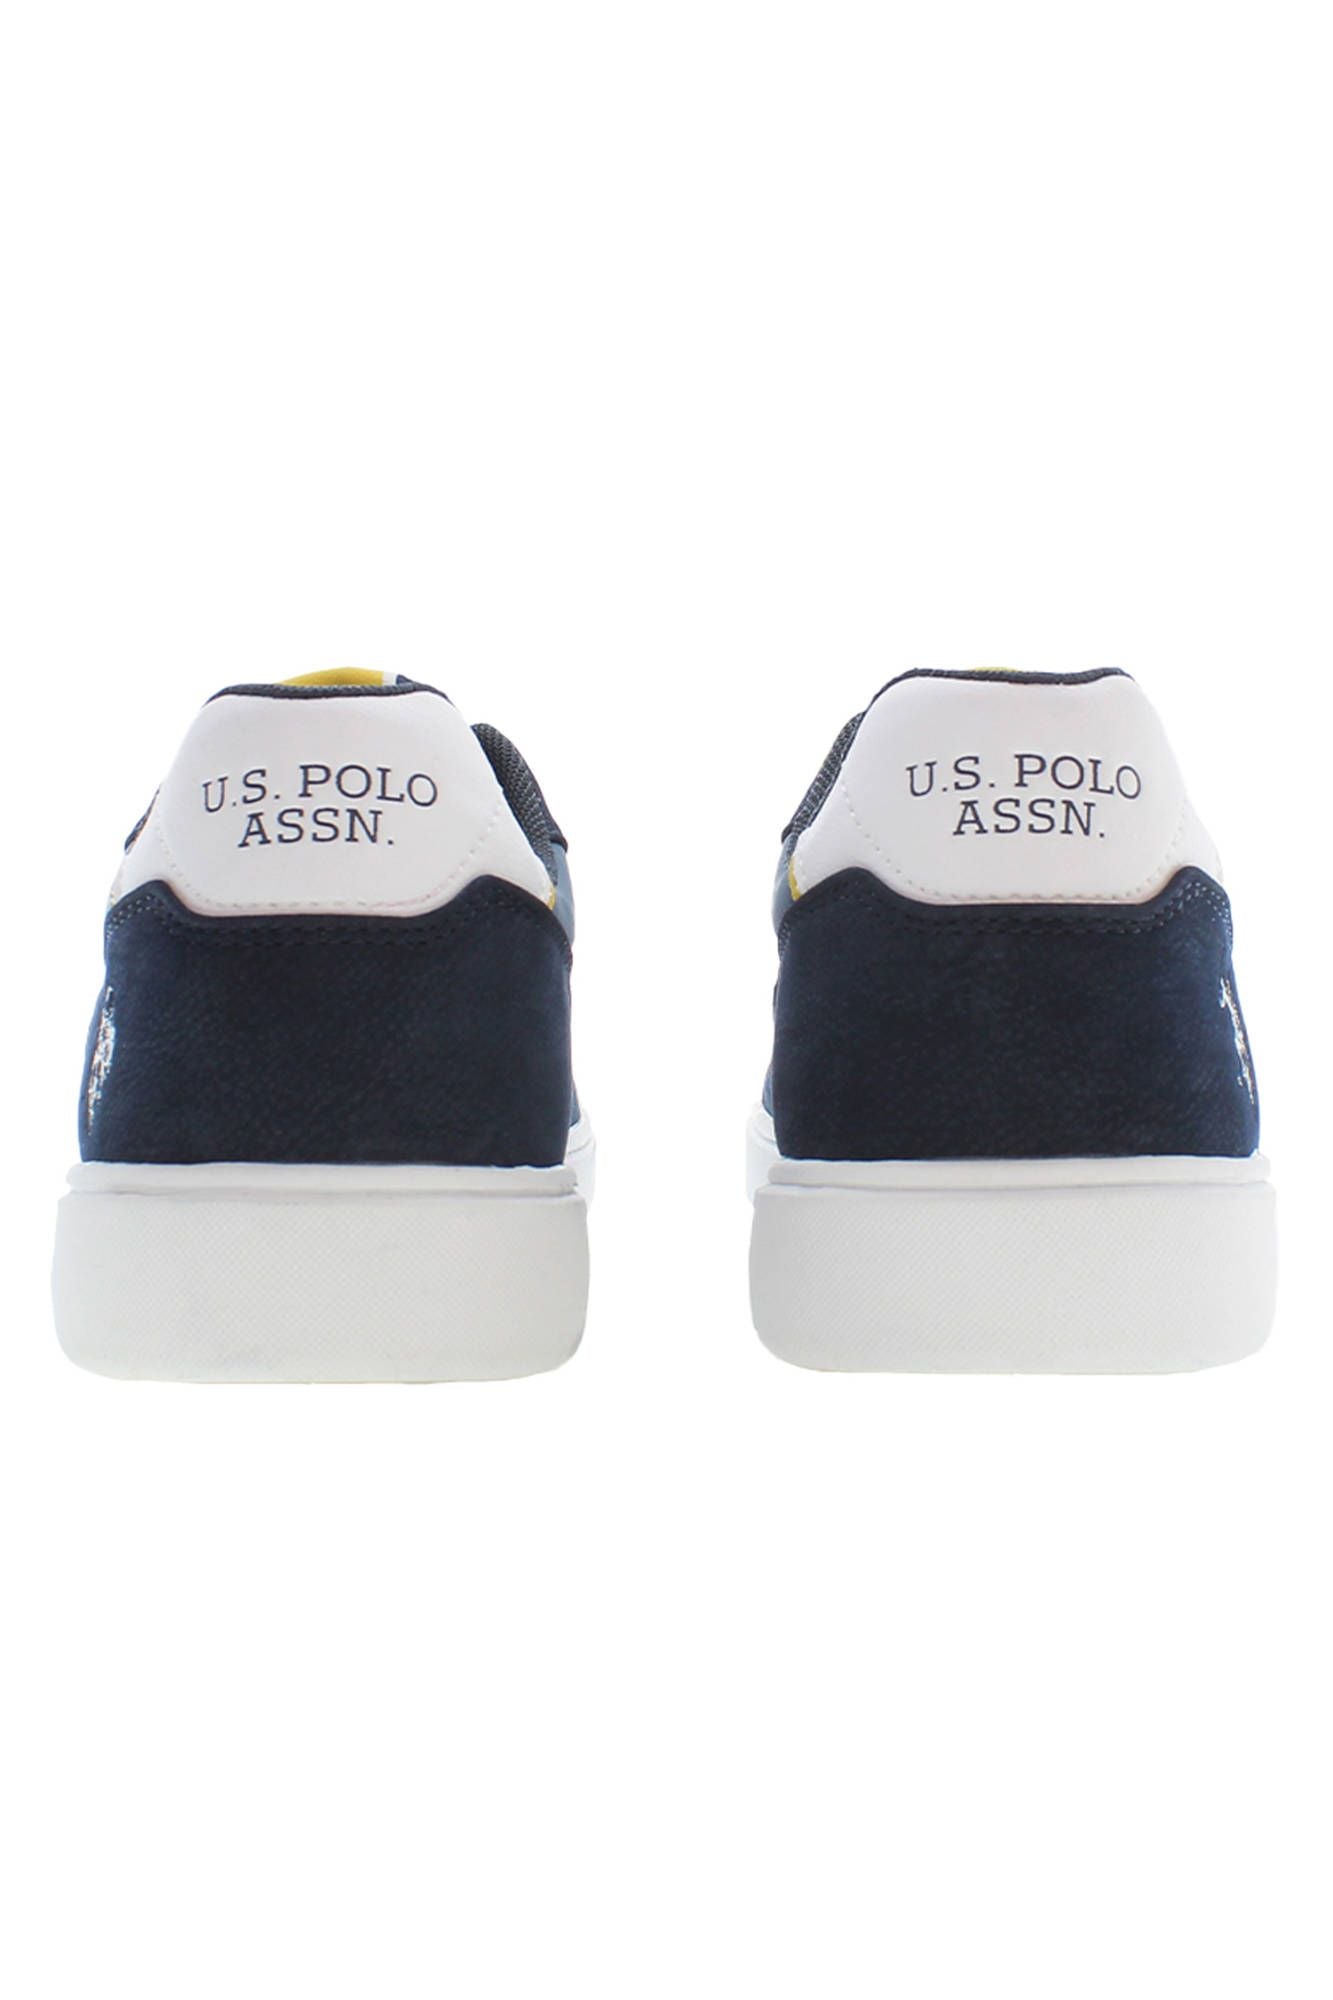 U.S. POLO ASSN. Sleek Blue Sneakers with Contrasting Details